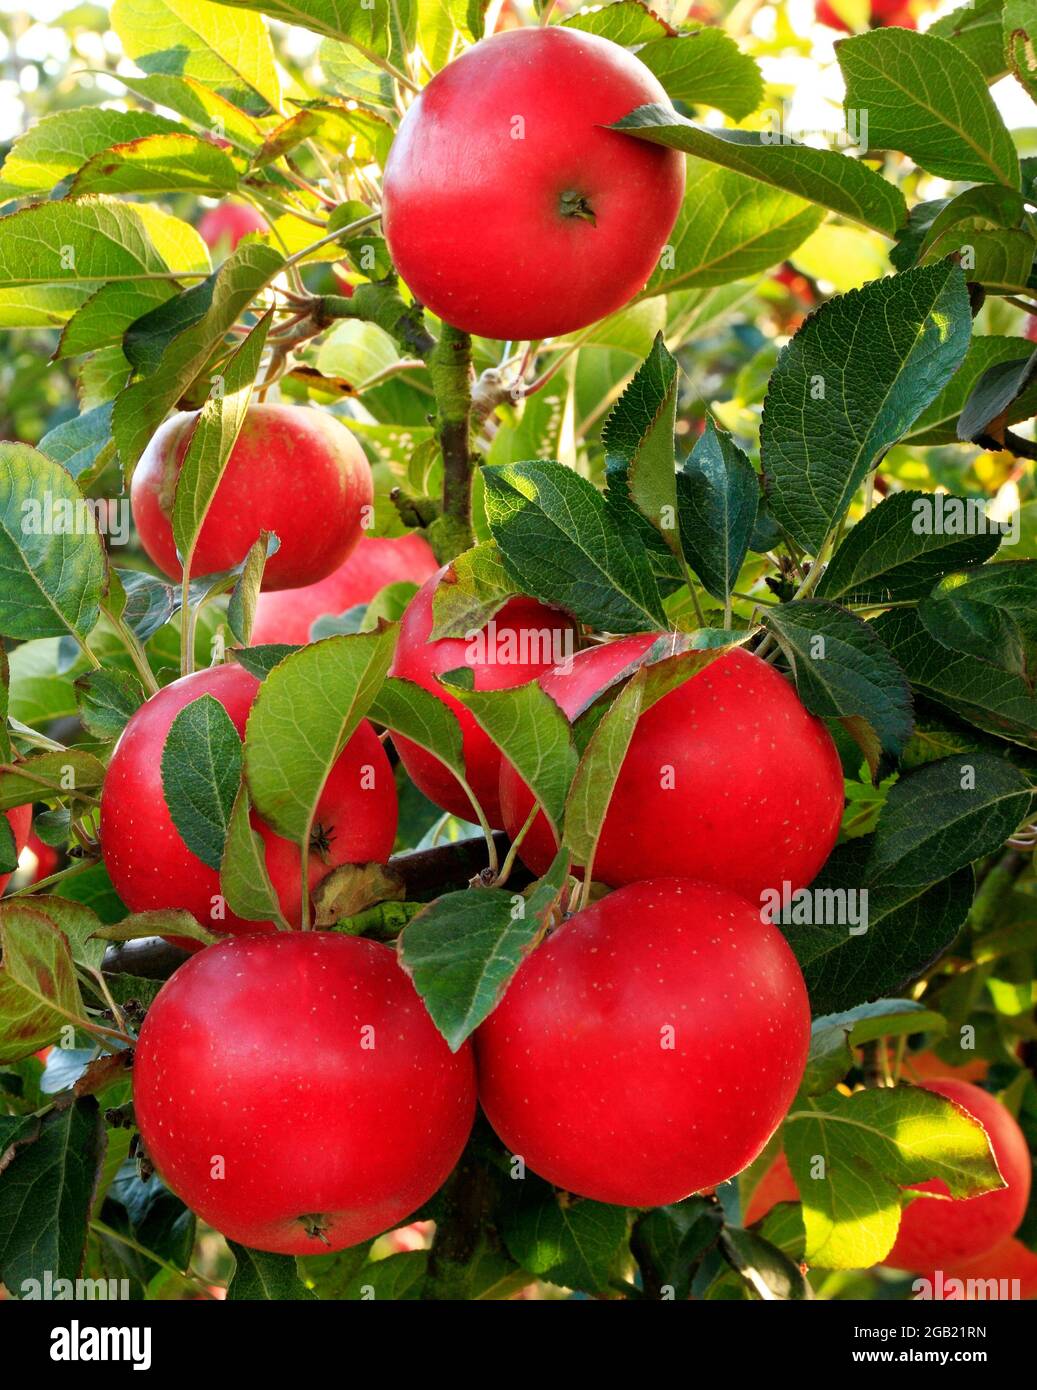 Apple 'Discovery', growing on tree, malus domestica, apples, fruit Stock Photo